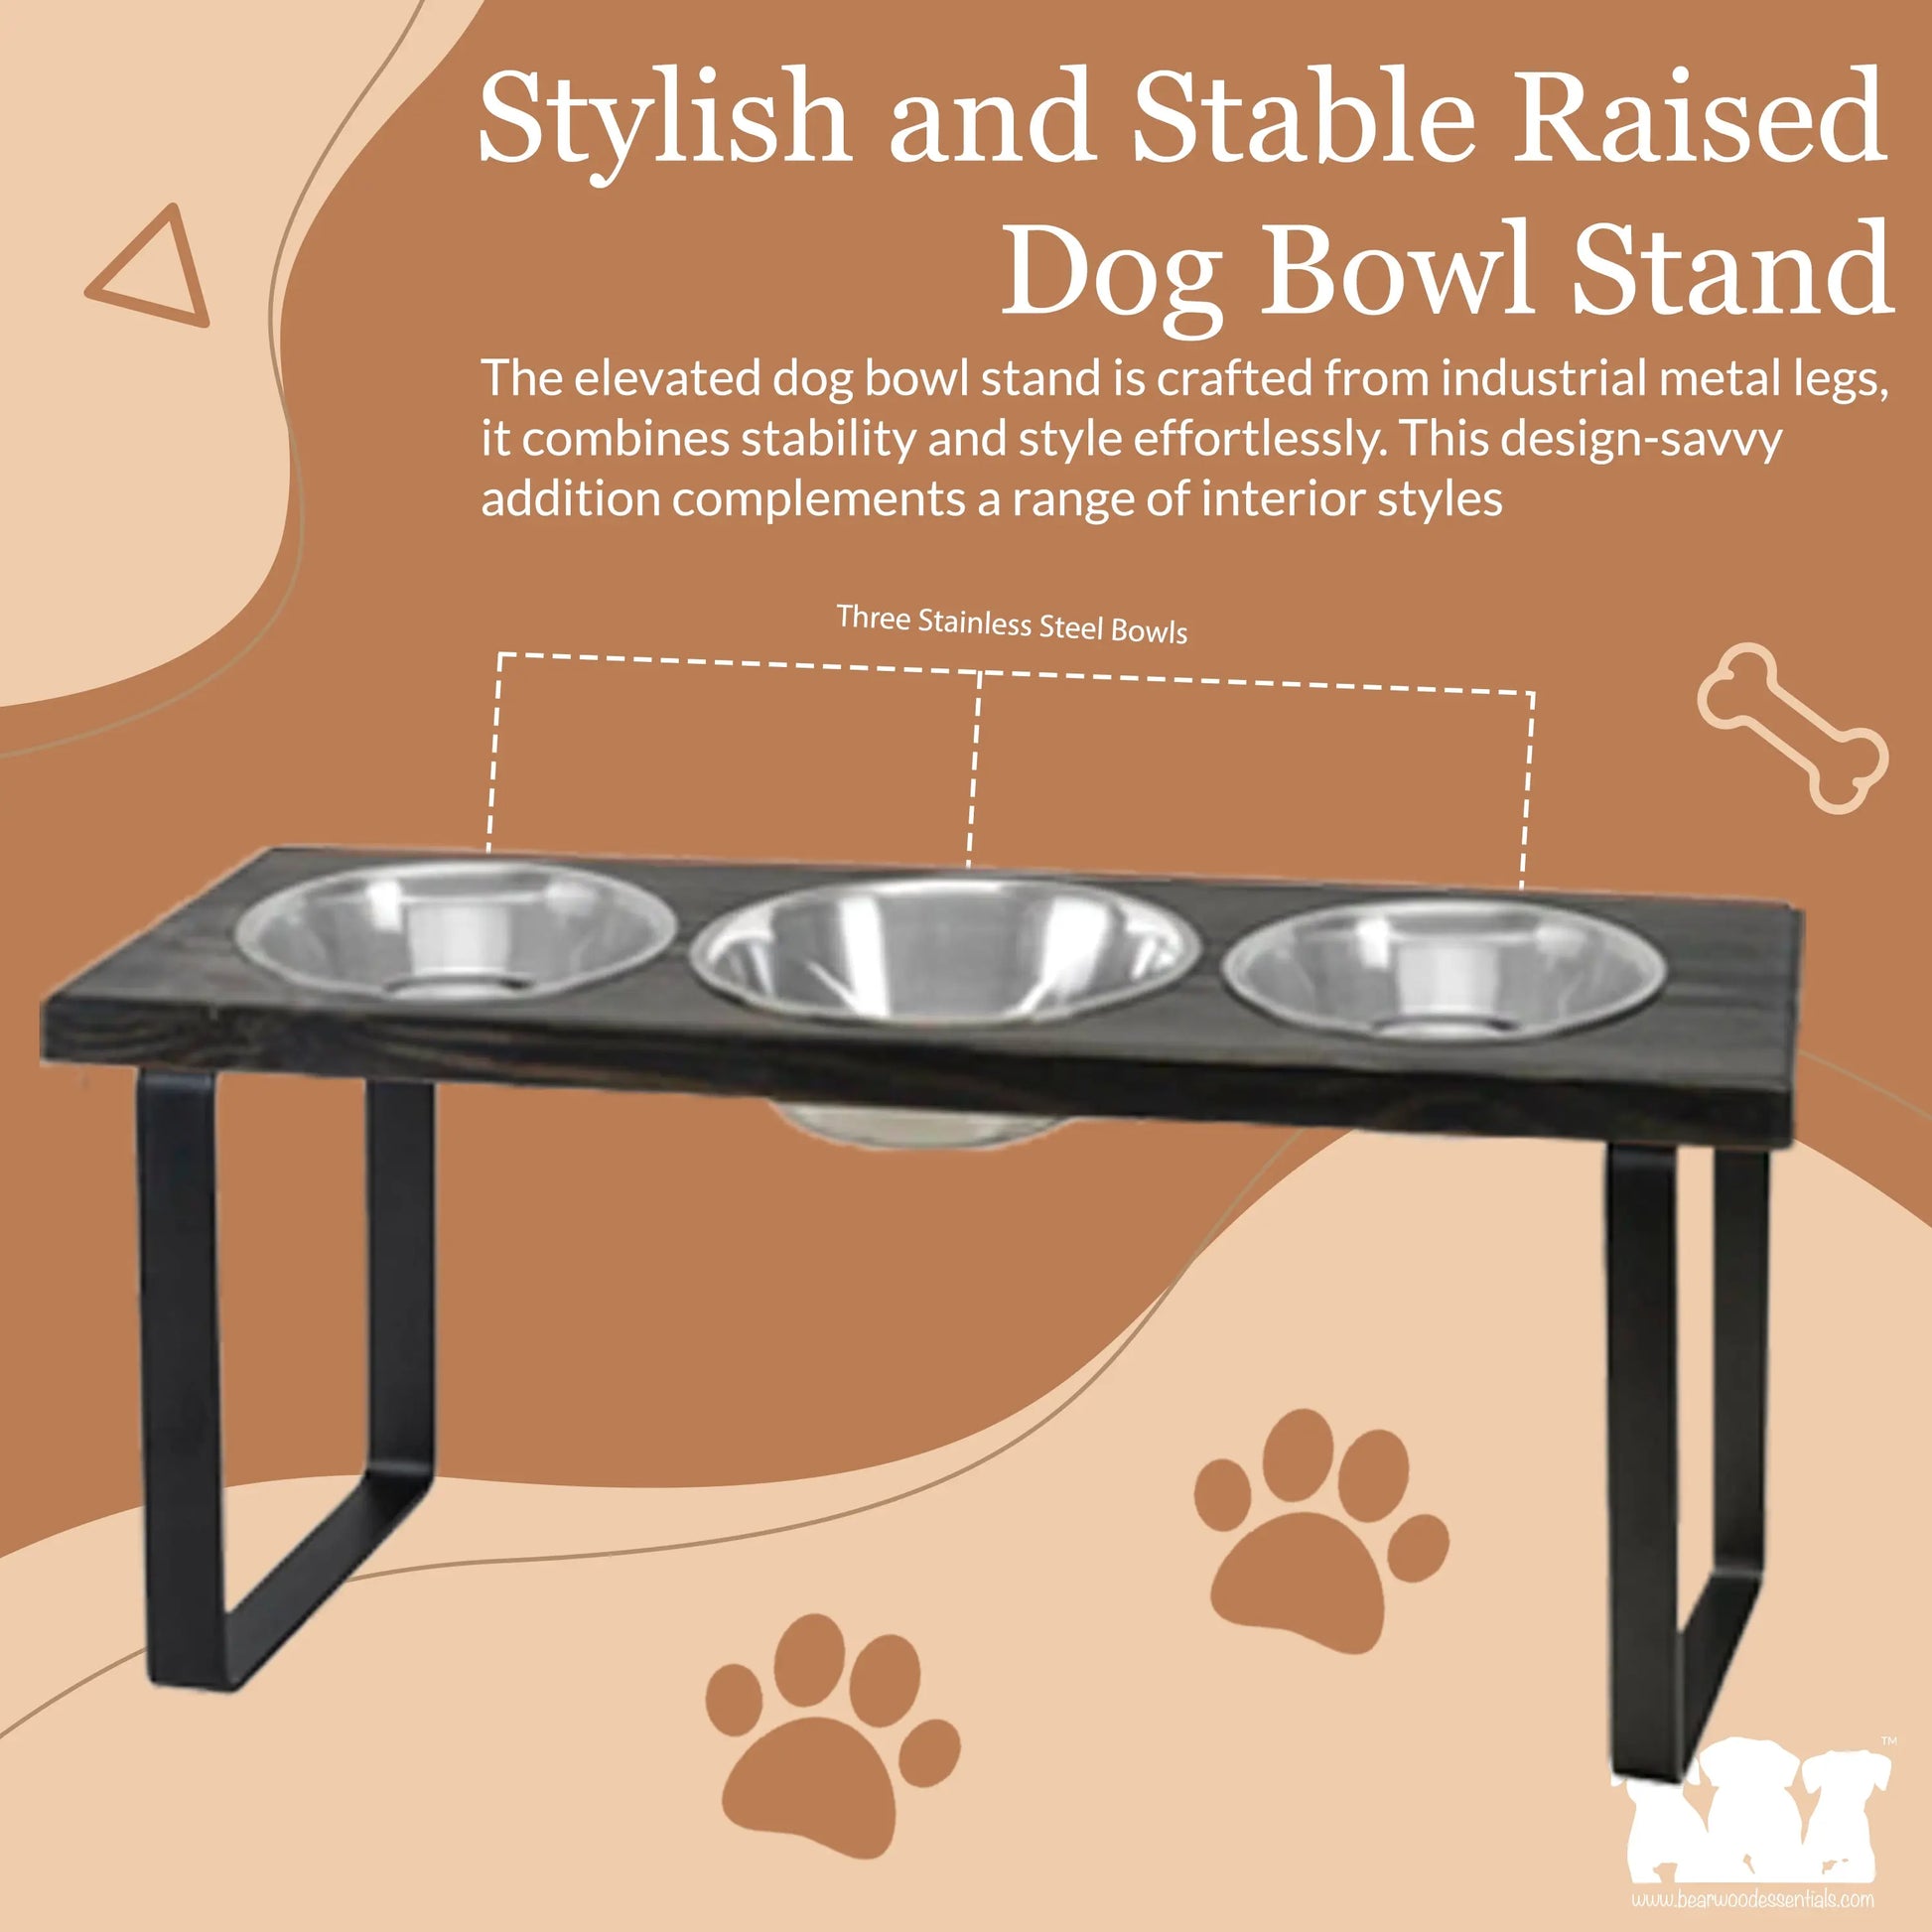 Metal Bowl Stand with Larger Bowl, Elevated Pet Feeding Station (2 Size/3 Colors) BearwoodEssentials-Elevated Pet Feeders